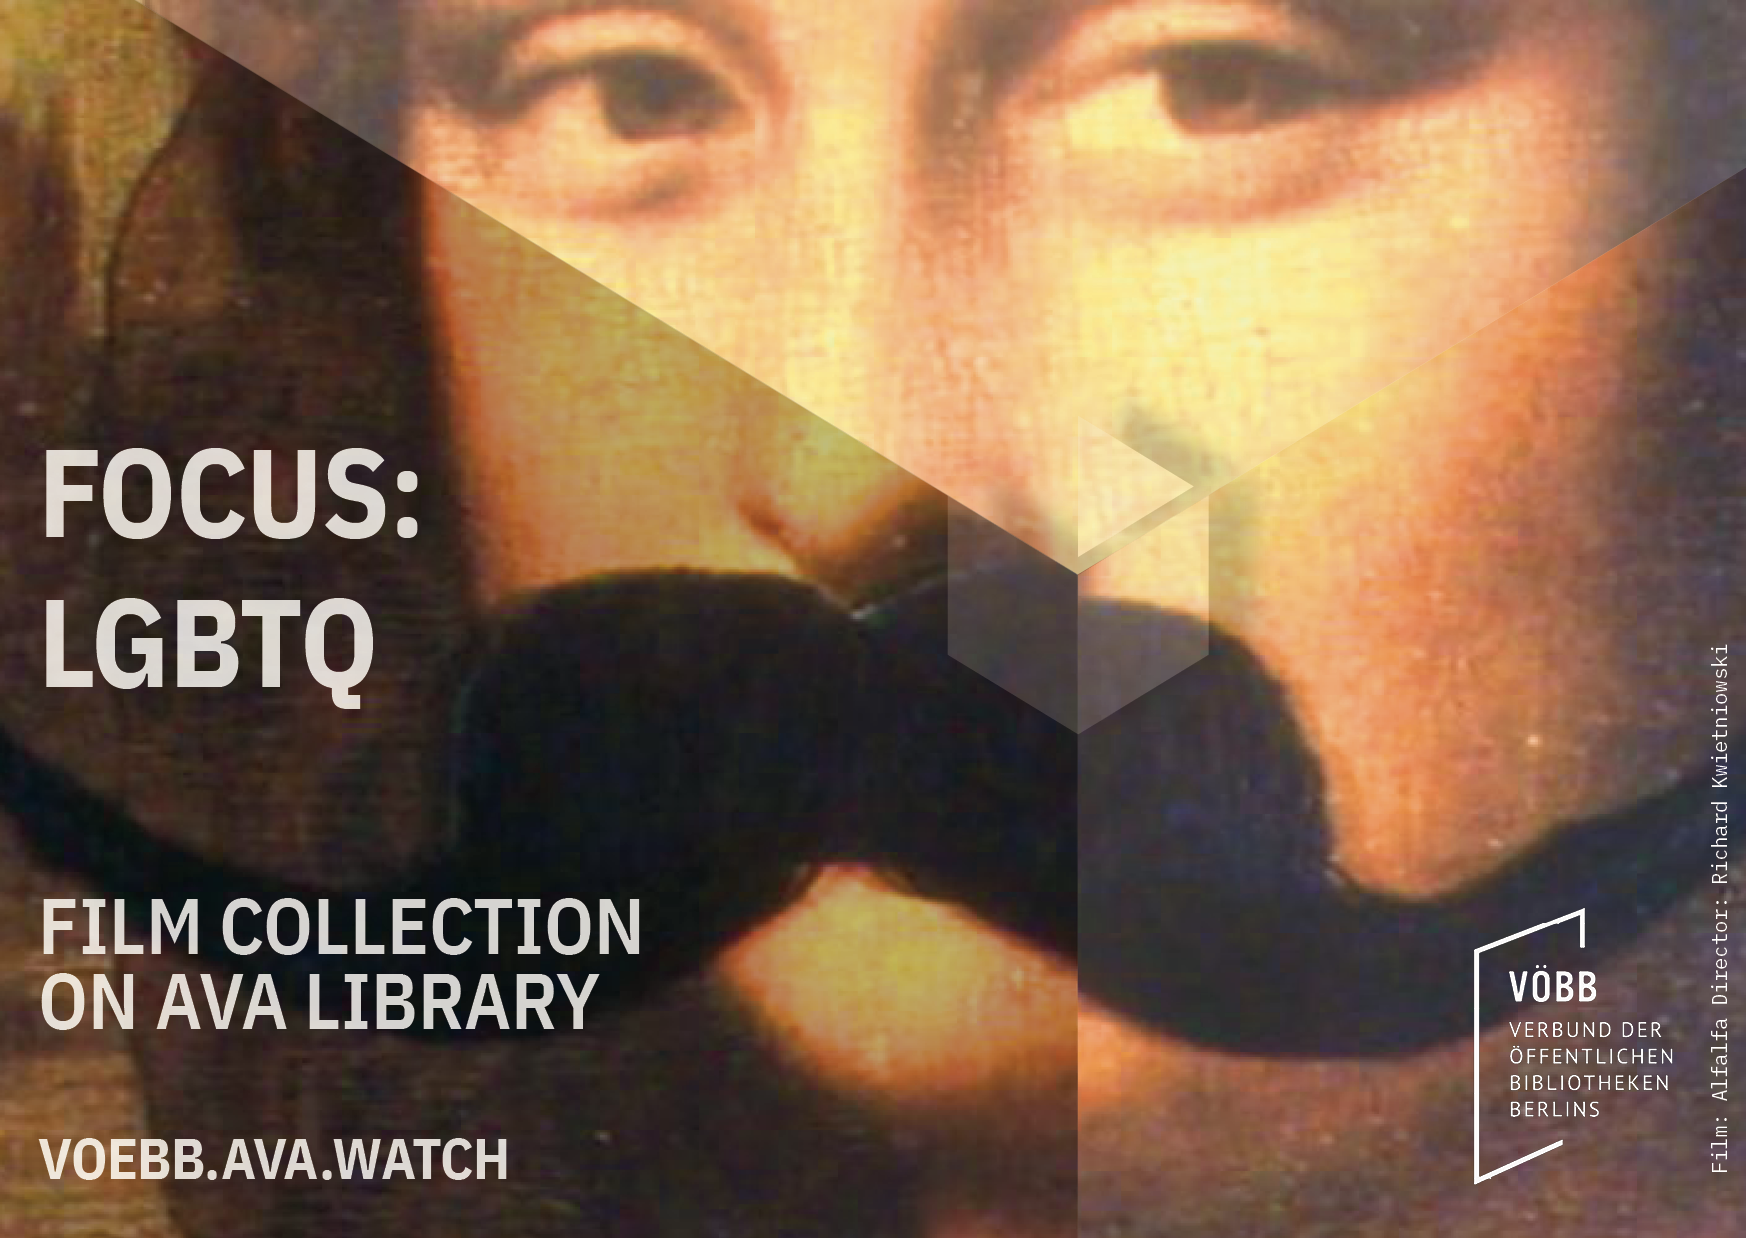 Mona Lisa with moustache and letters on it: Focus LGBTQ Film Collection on AVA Library